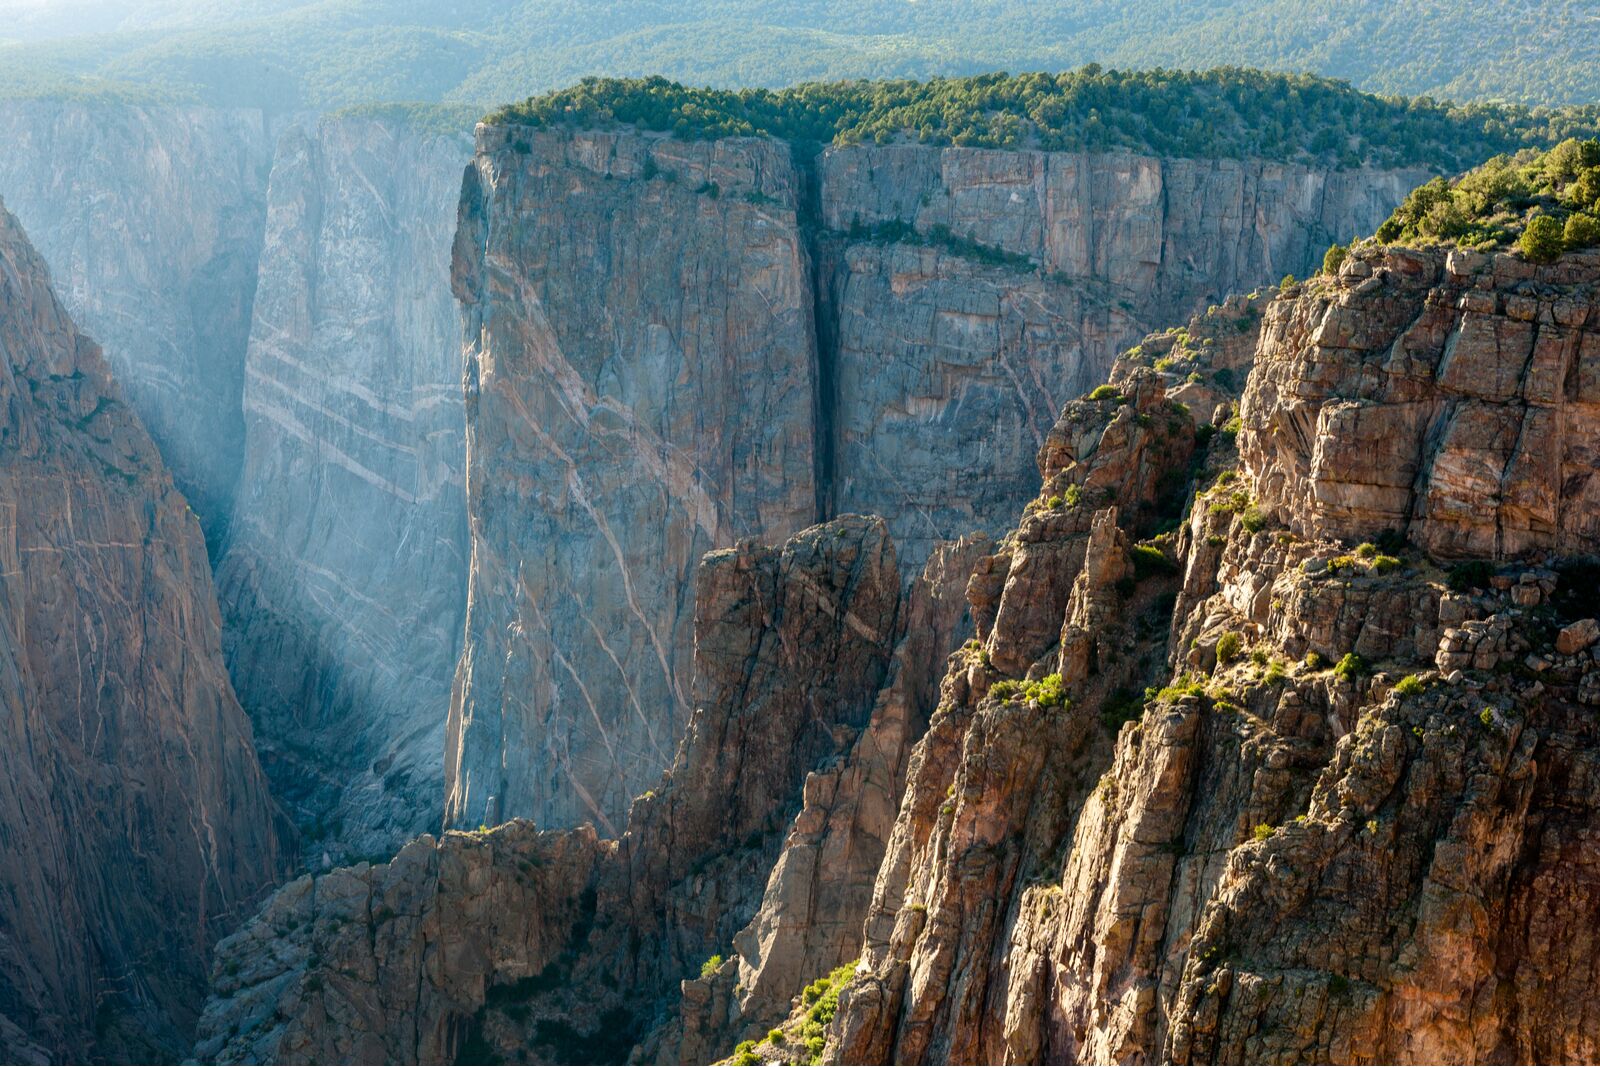 Painted Wall, a famous climb in black canyon of the gunnison national park 